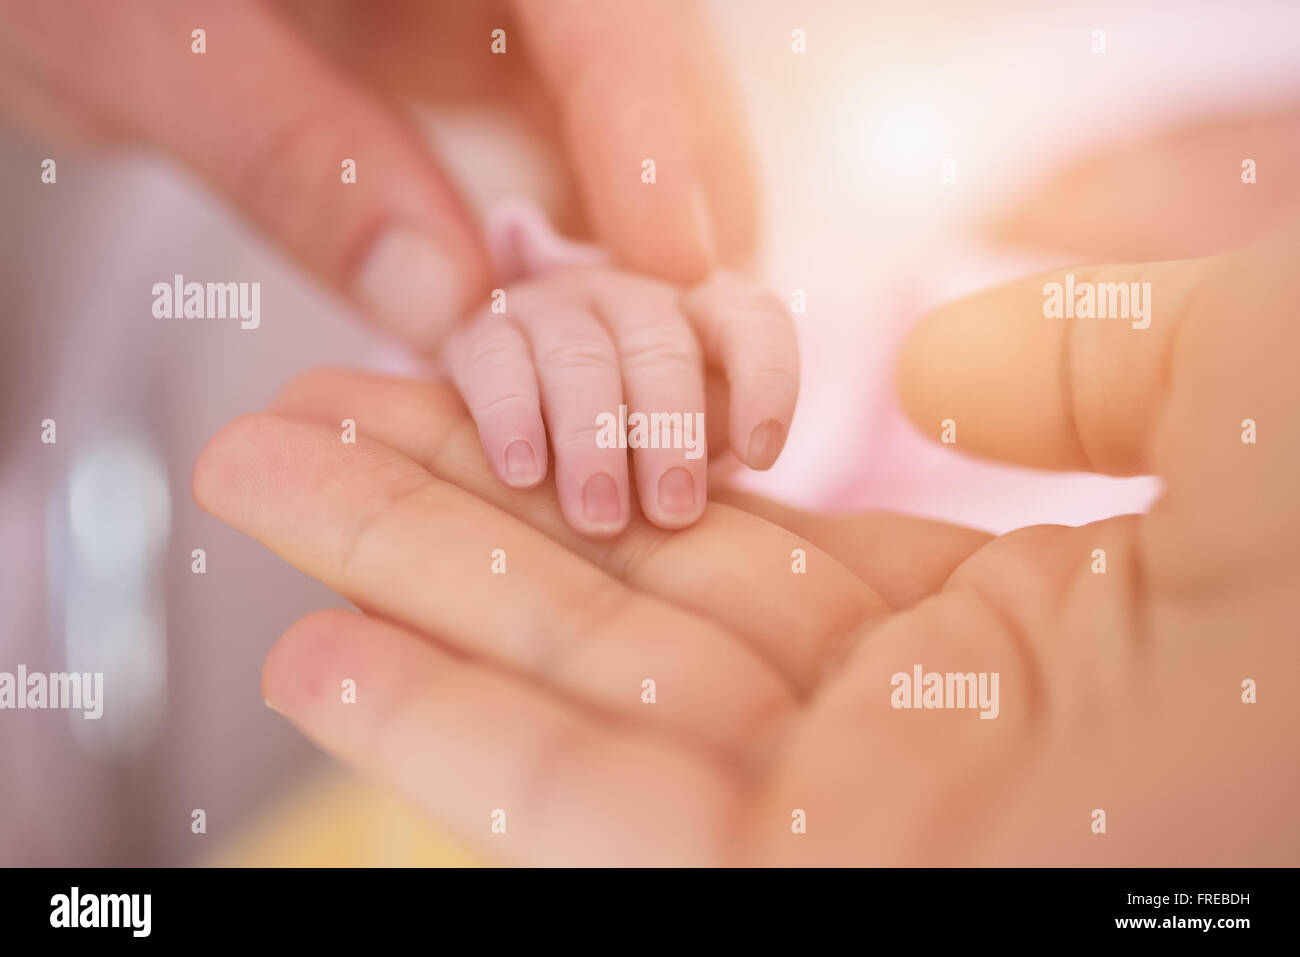 mother's hand holding babies hand Stock Photo